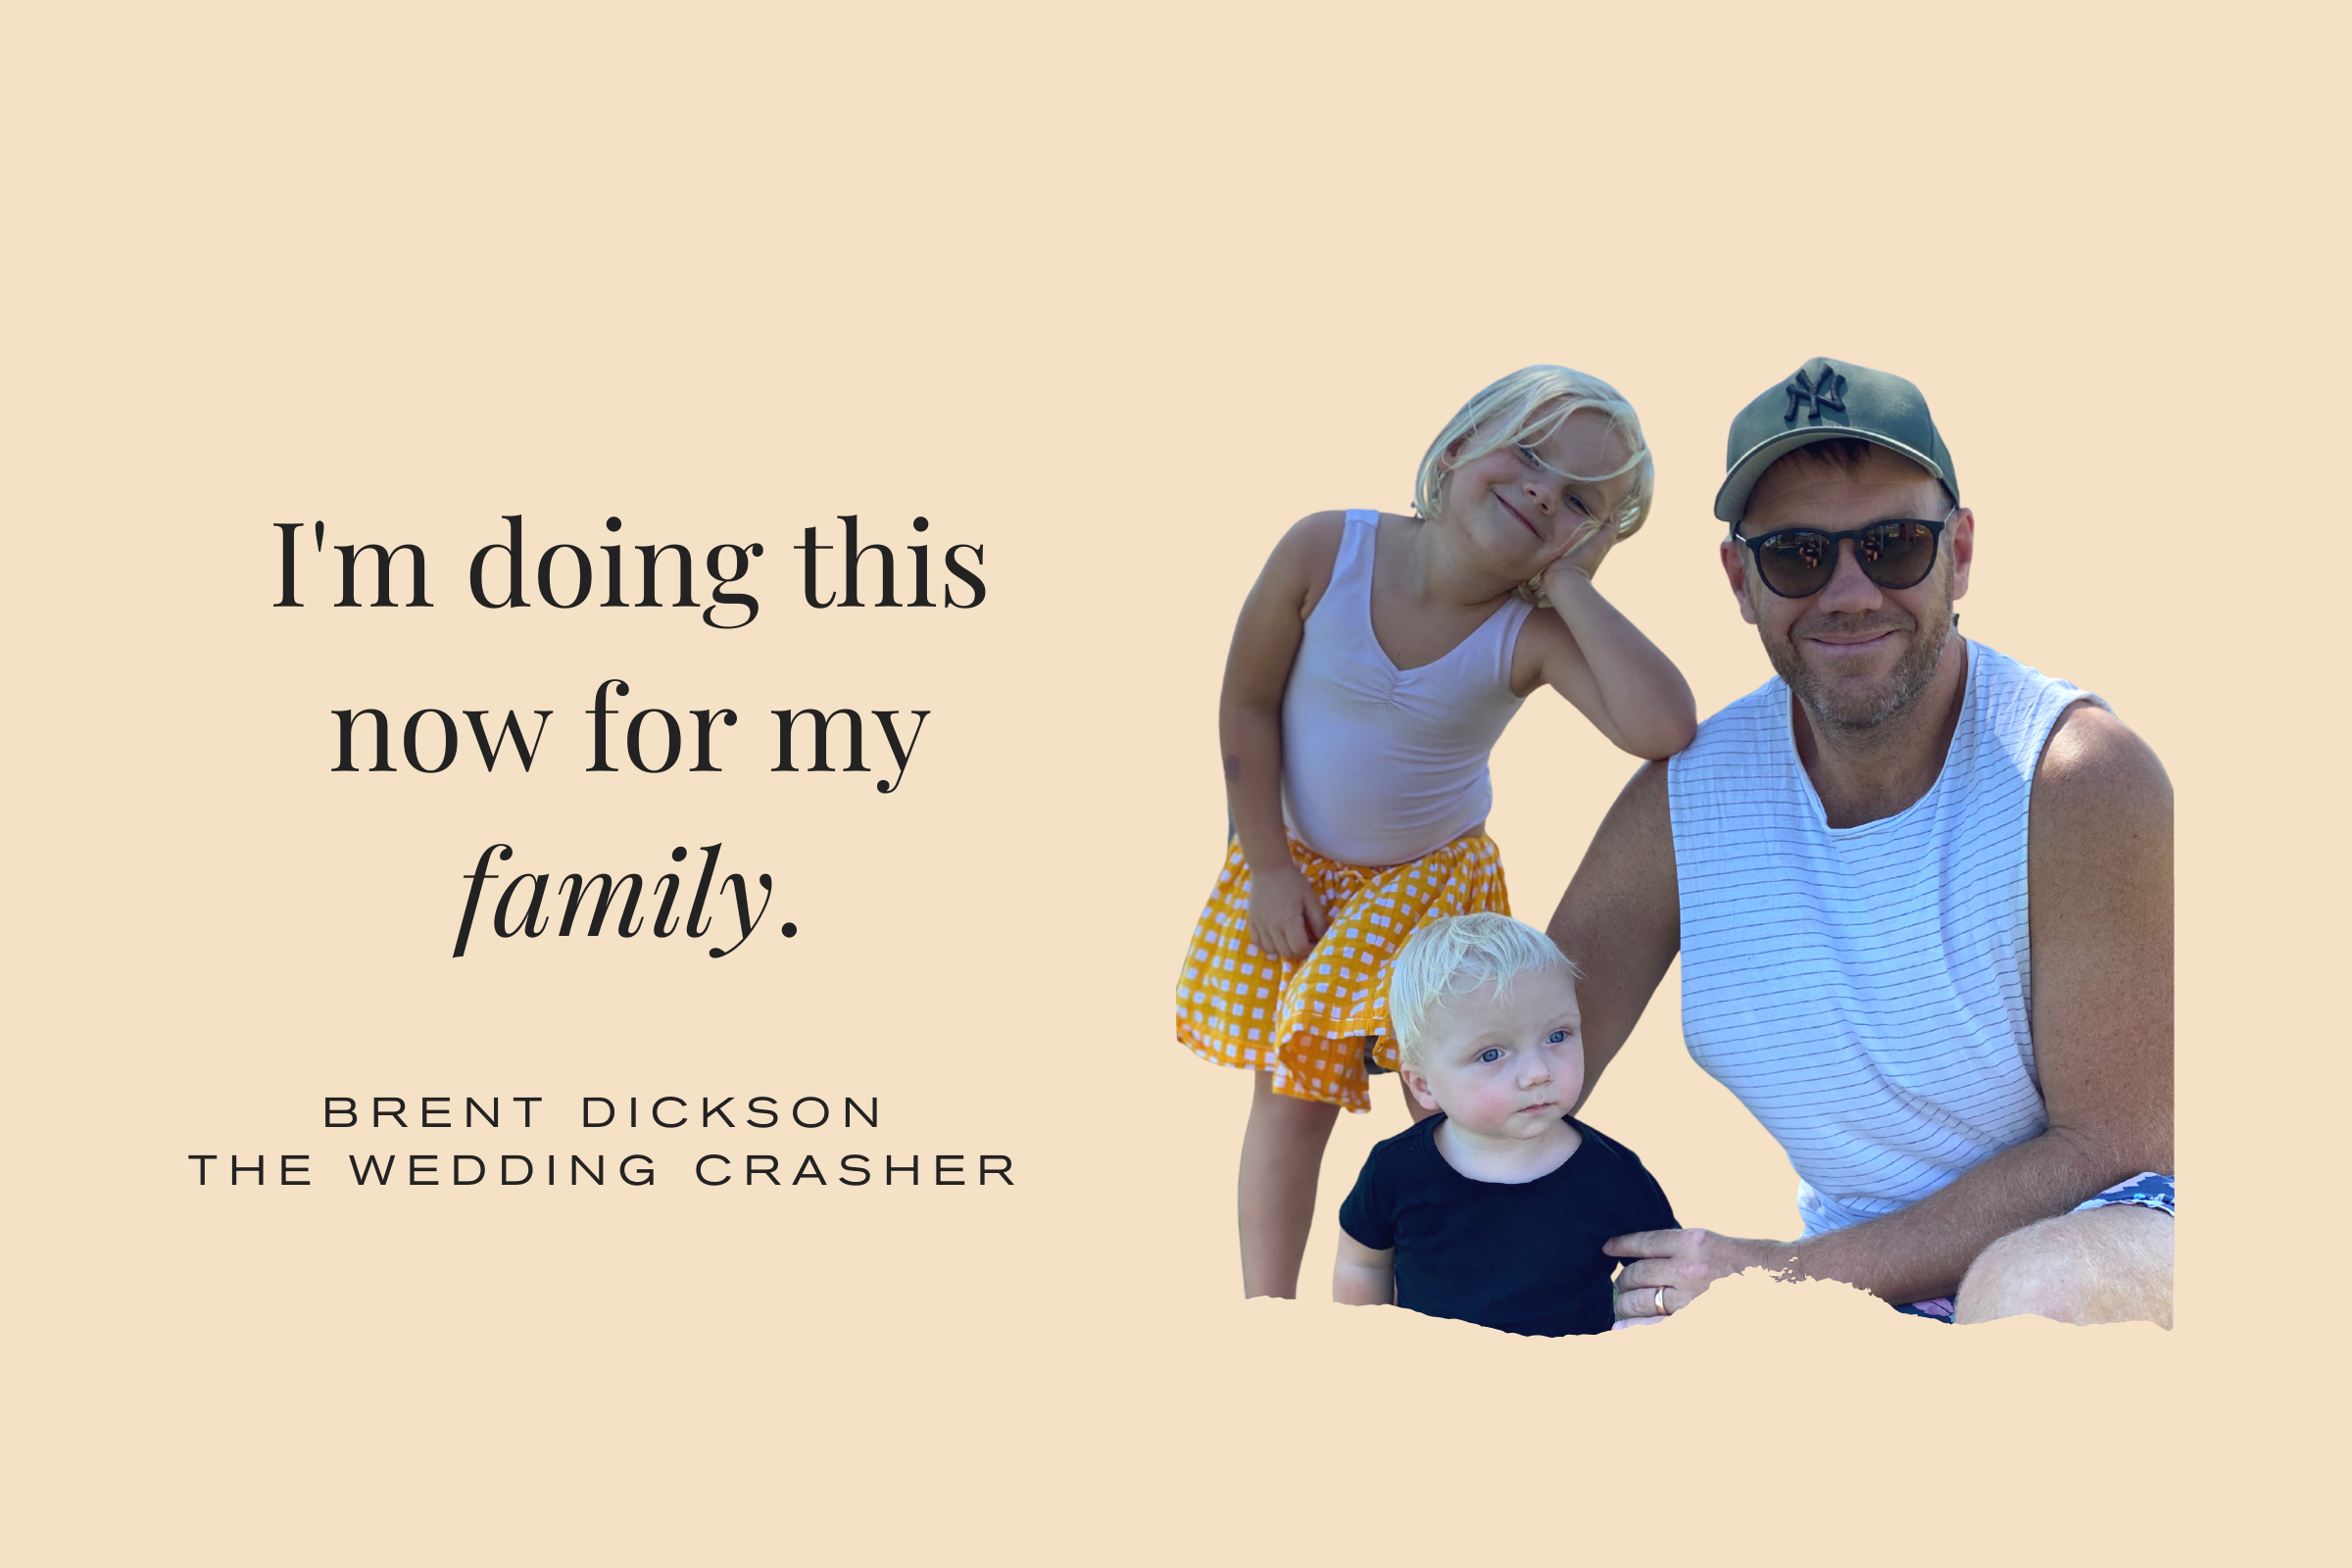 Brent Dickson The Wedding Crasher Quote: I'm doing this for my family